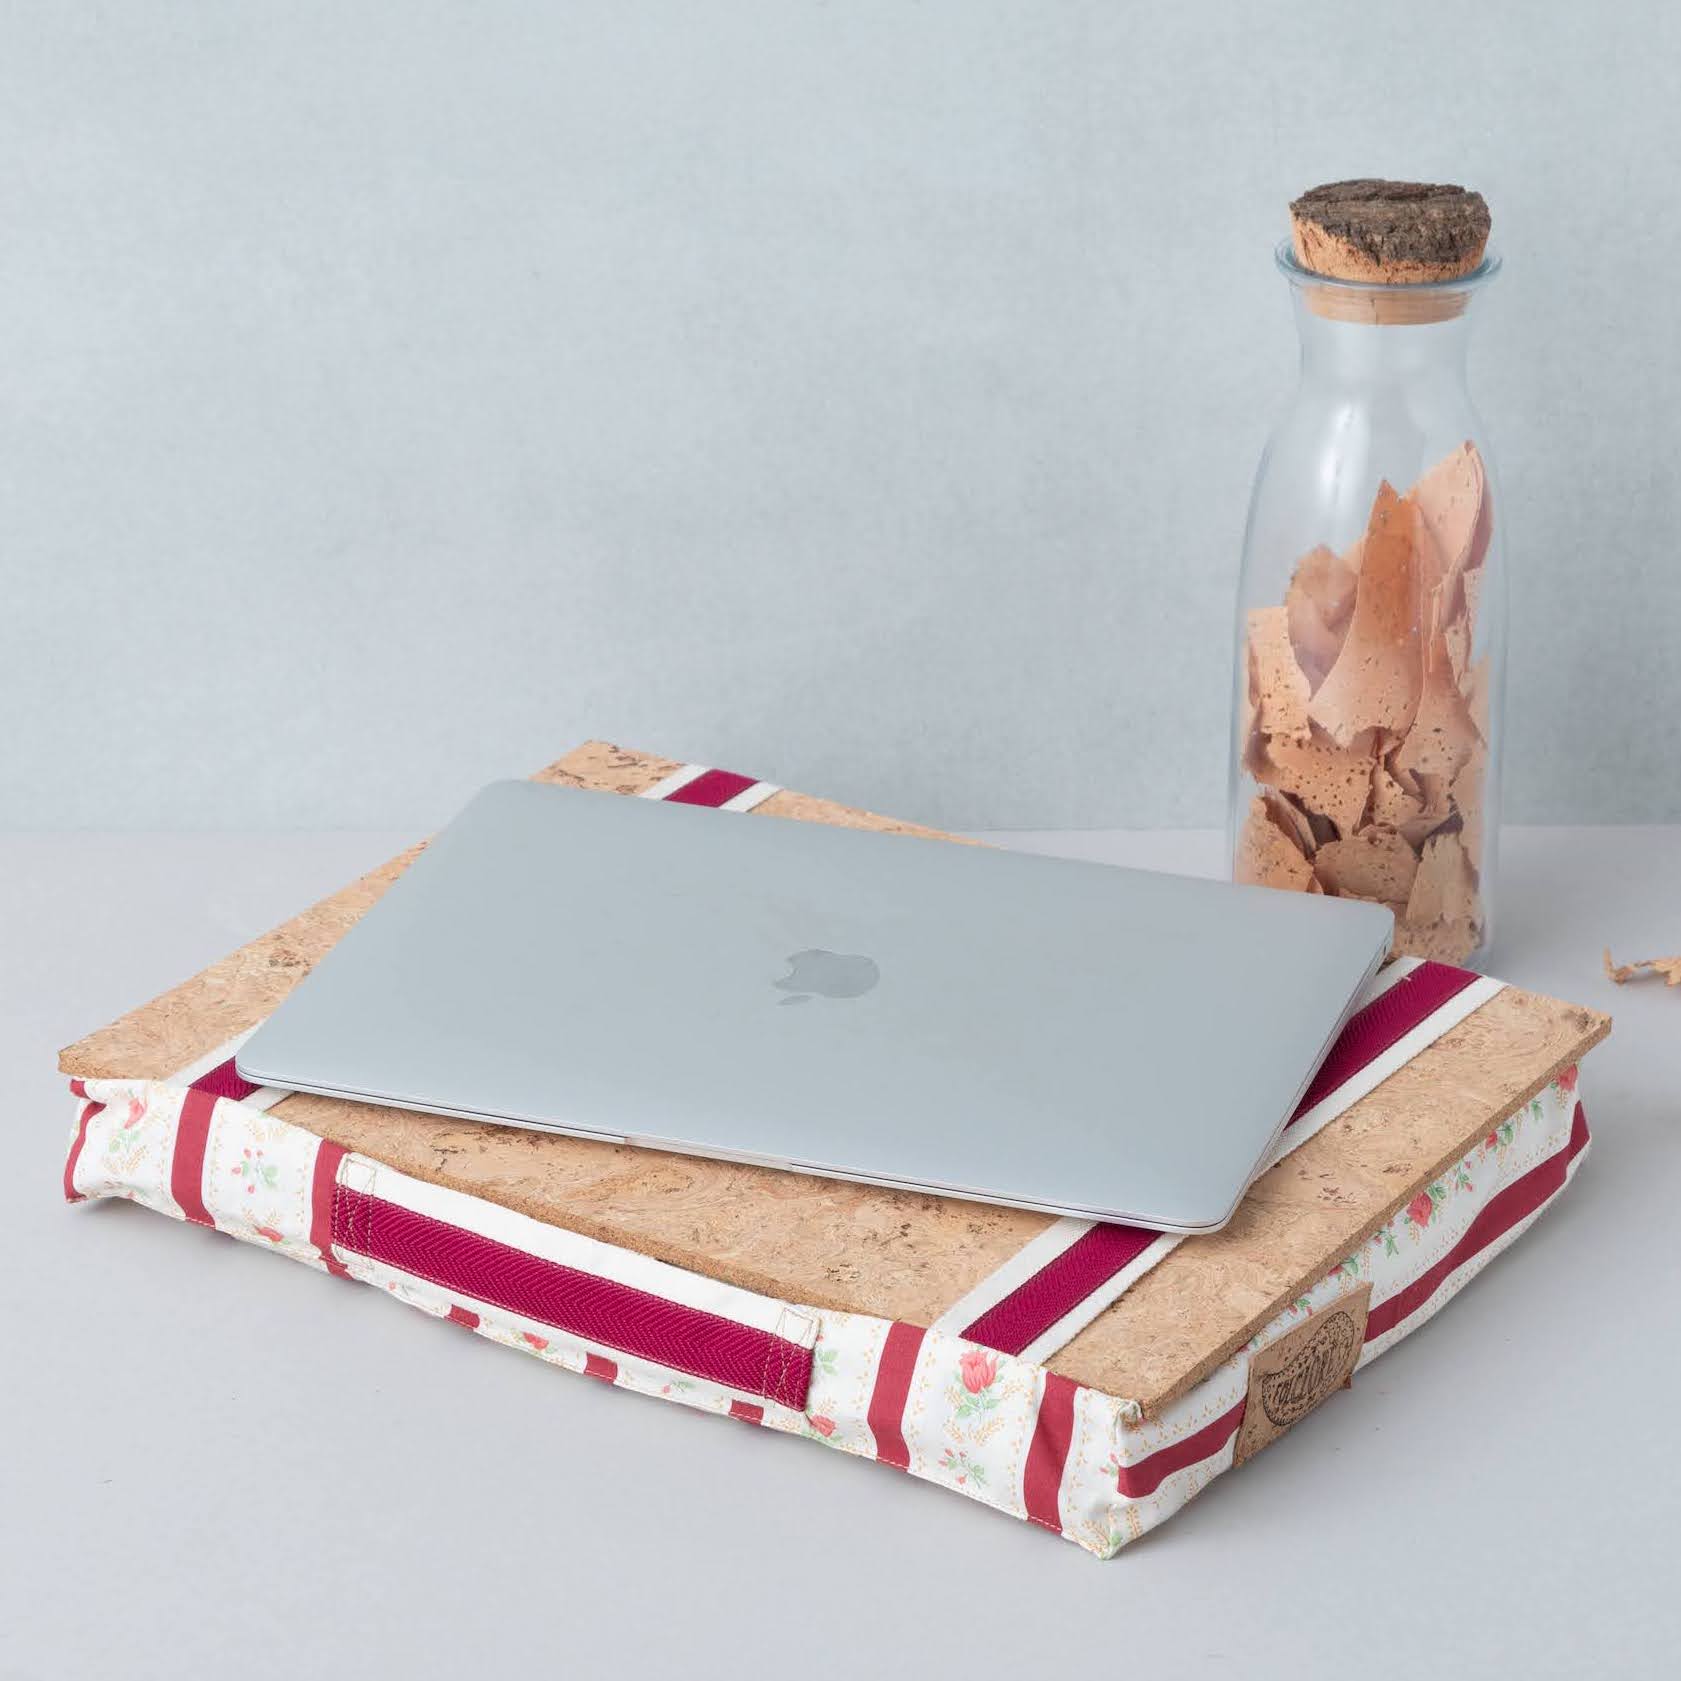 Eco-friendly Lap desk for laptop made from cork and cotton fabric